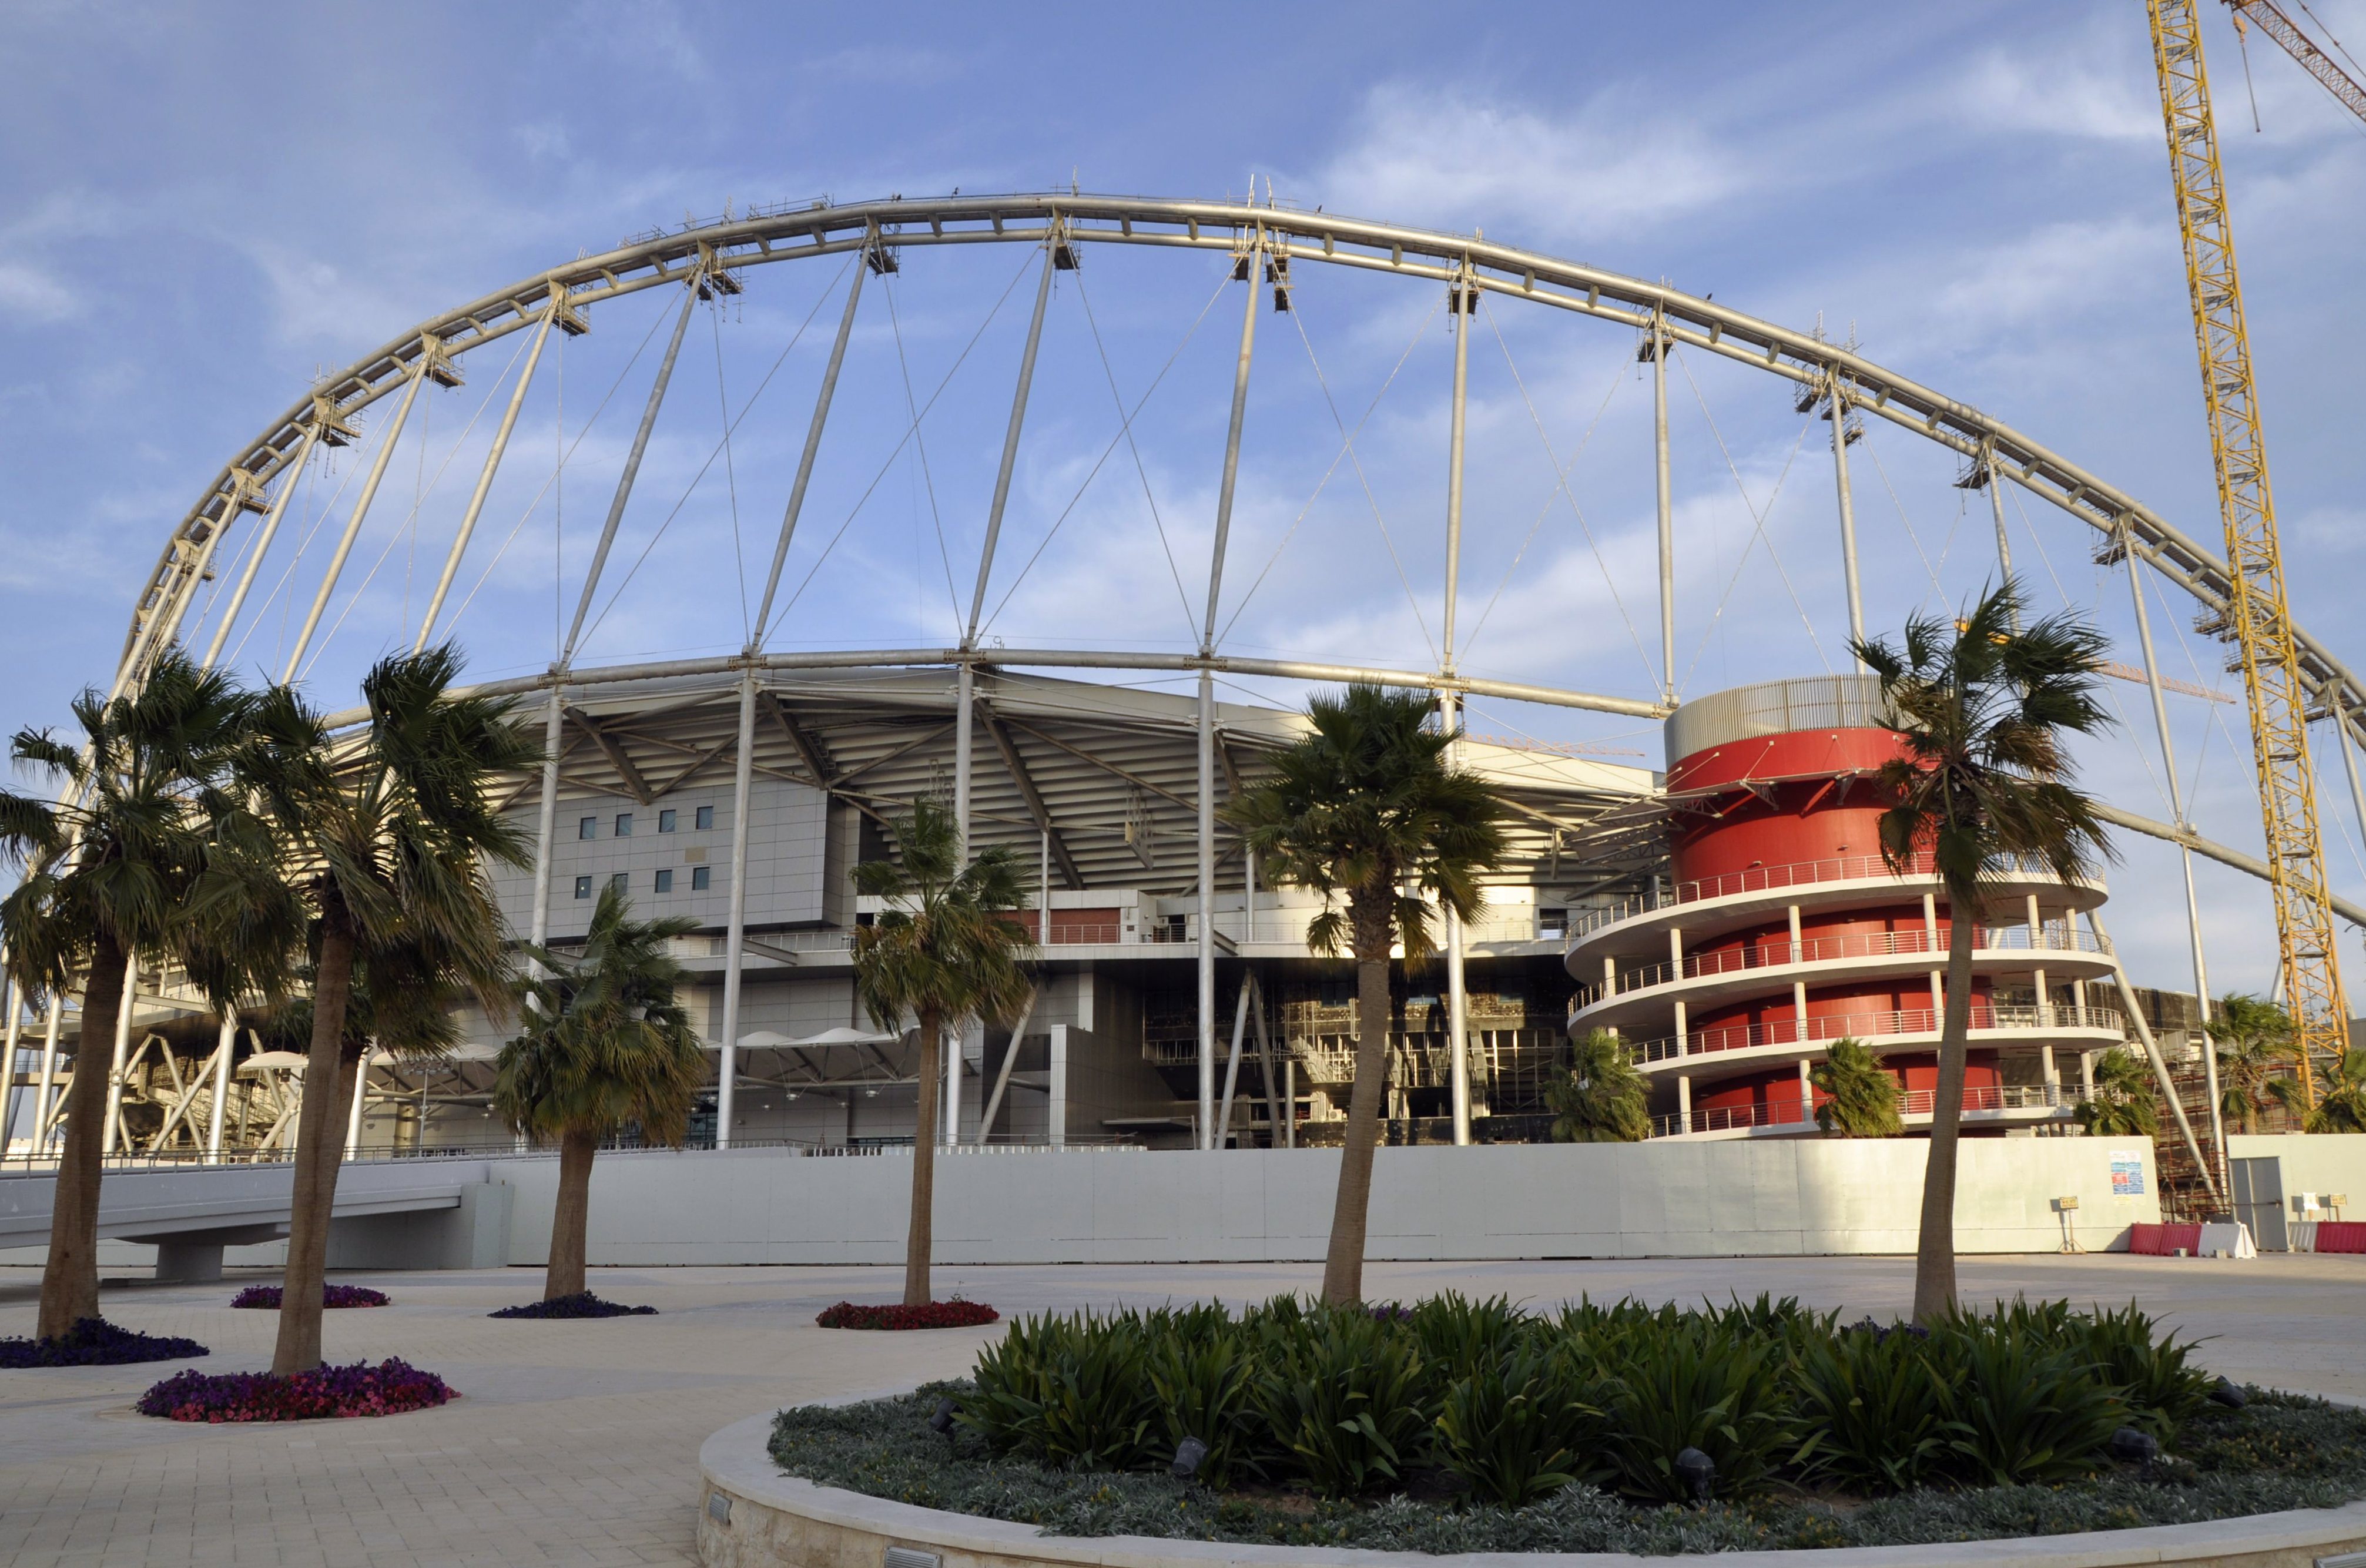 The Chalifa International Stadium (pictured during preparations for 2022 FIFA World Cup) in sporting complex Aspire Zone in Doha, Qatar on Jan. 20, 2015.